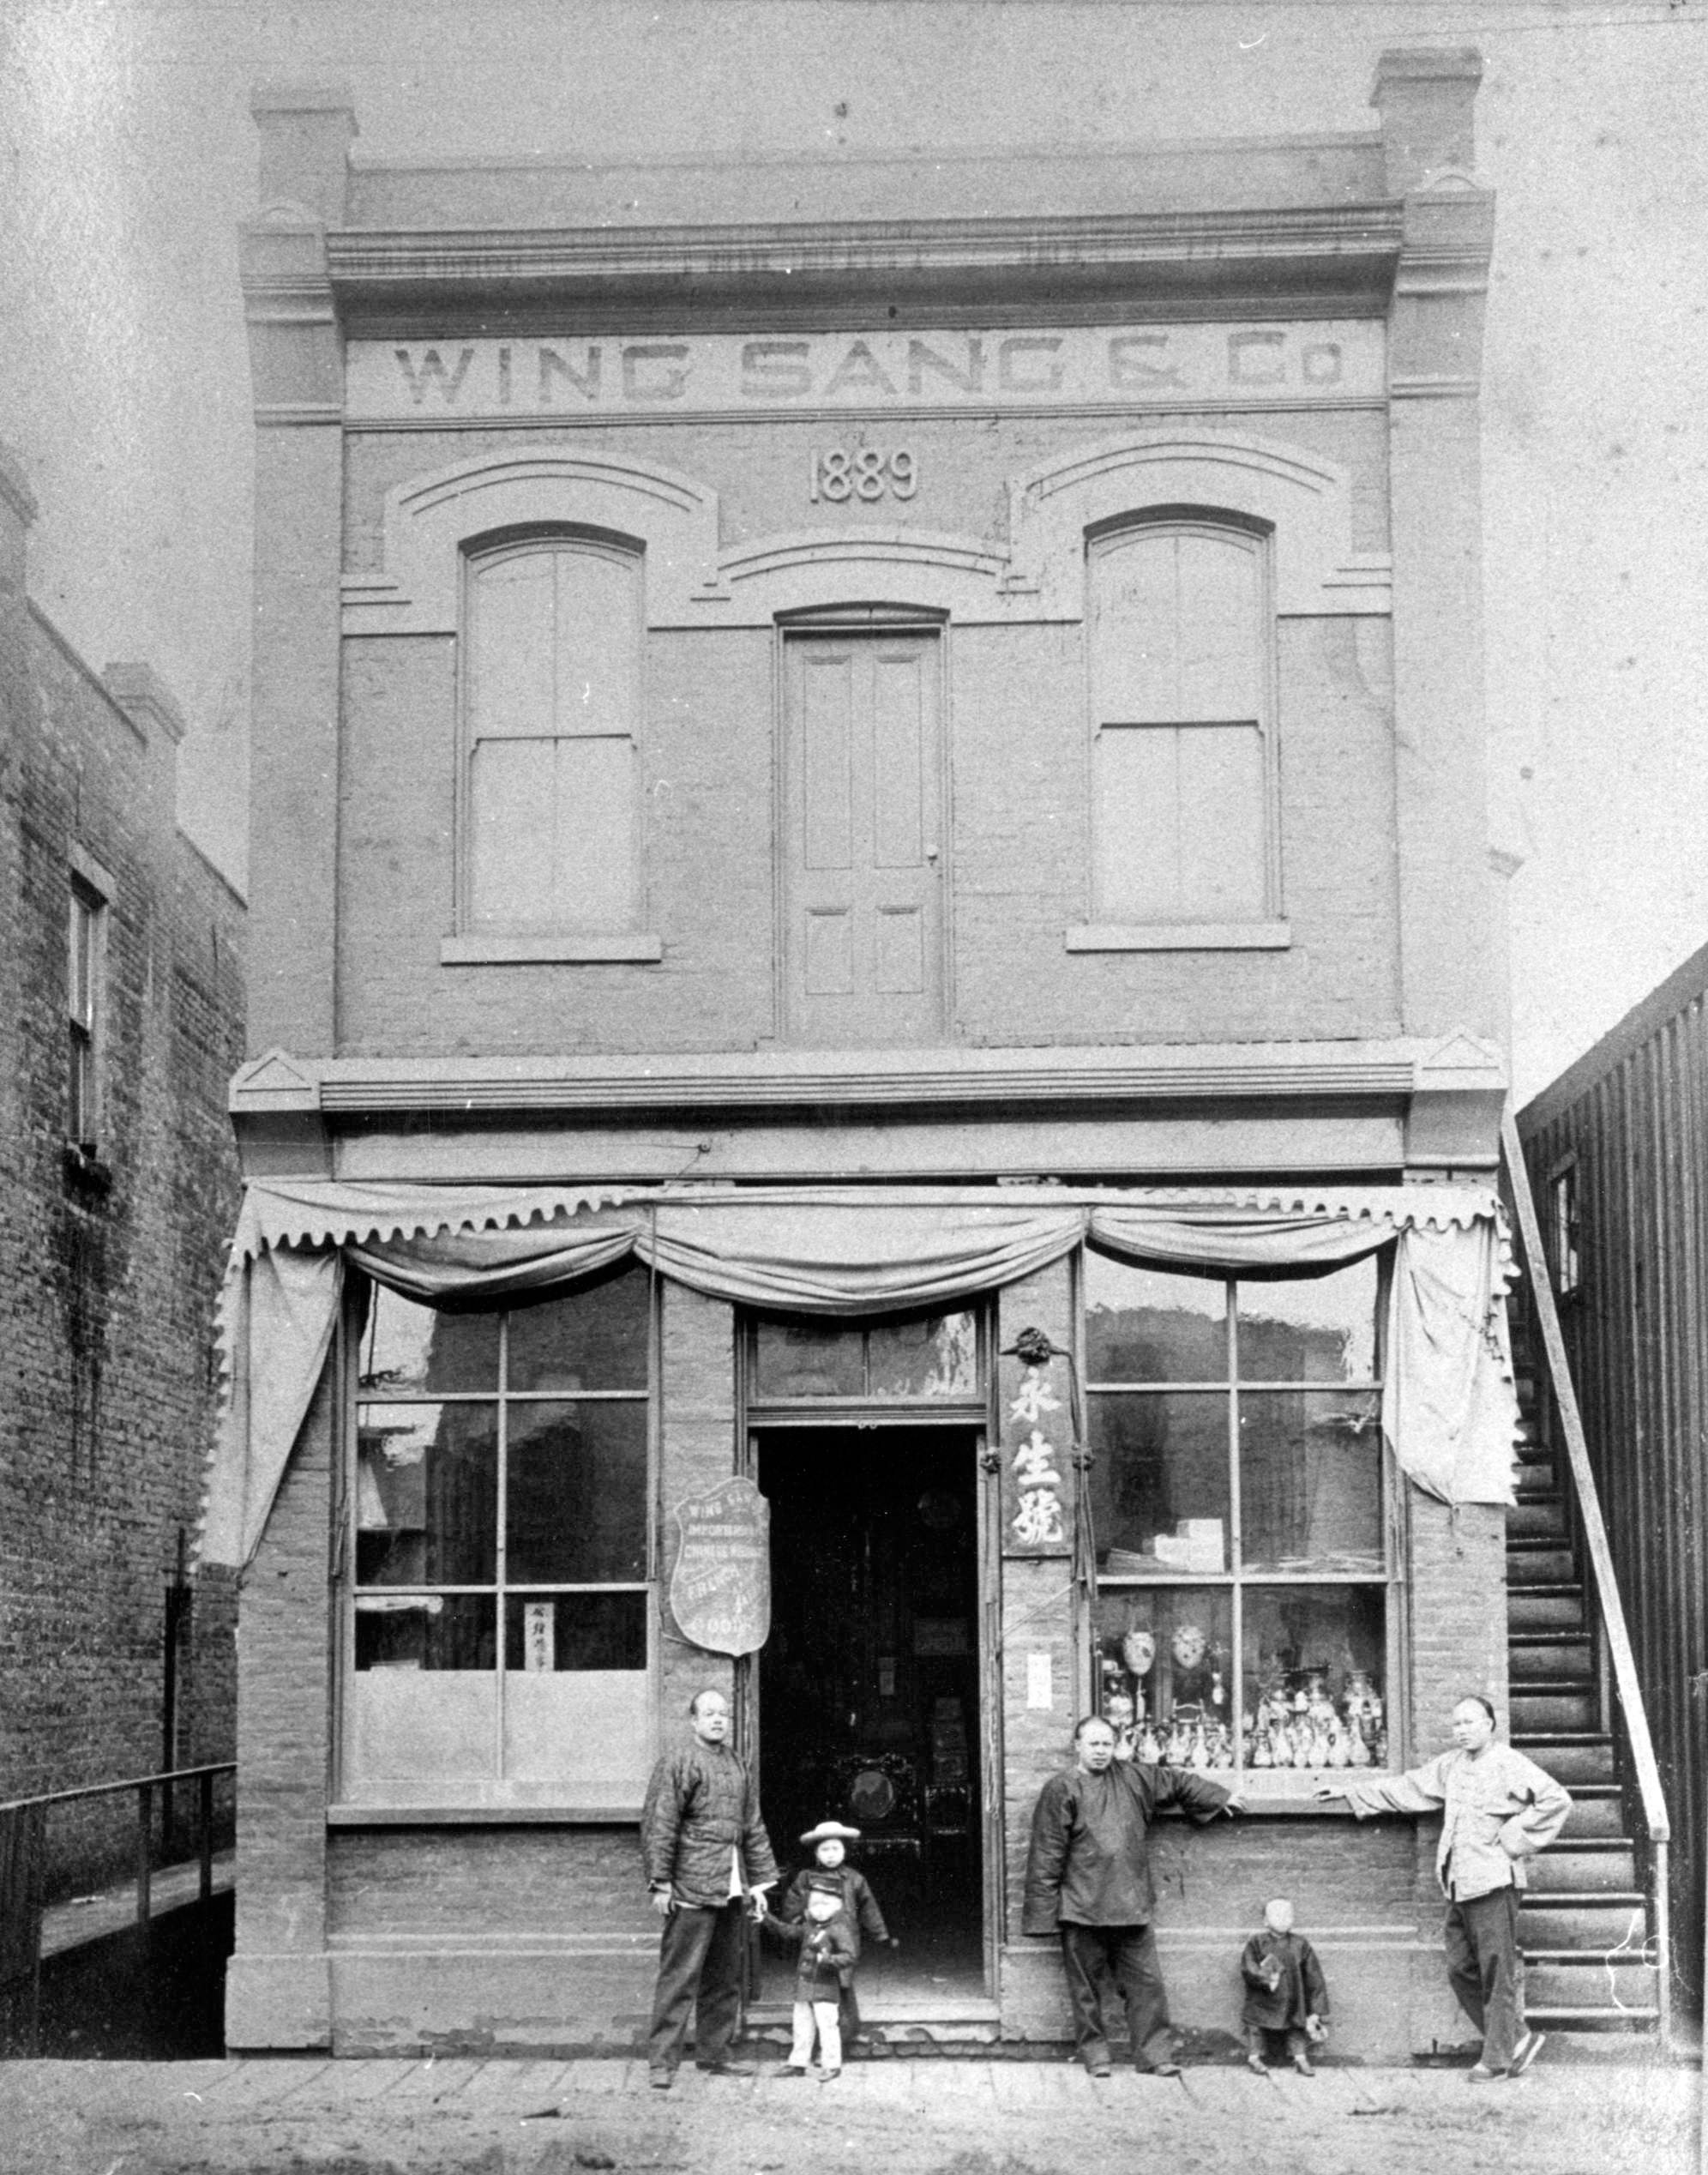 A man beside two children in the doorway of a two-storey Victorian commercial building. Two other men and a child stand in front of a packed window display. They are all ethnically Chinese. The photo is black and white.